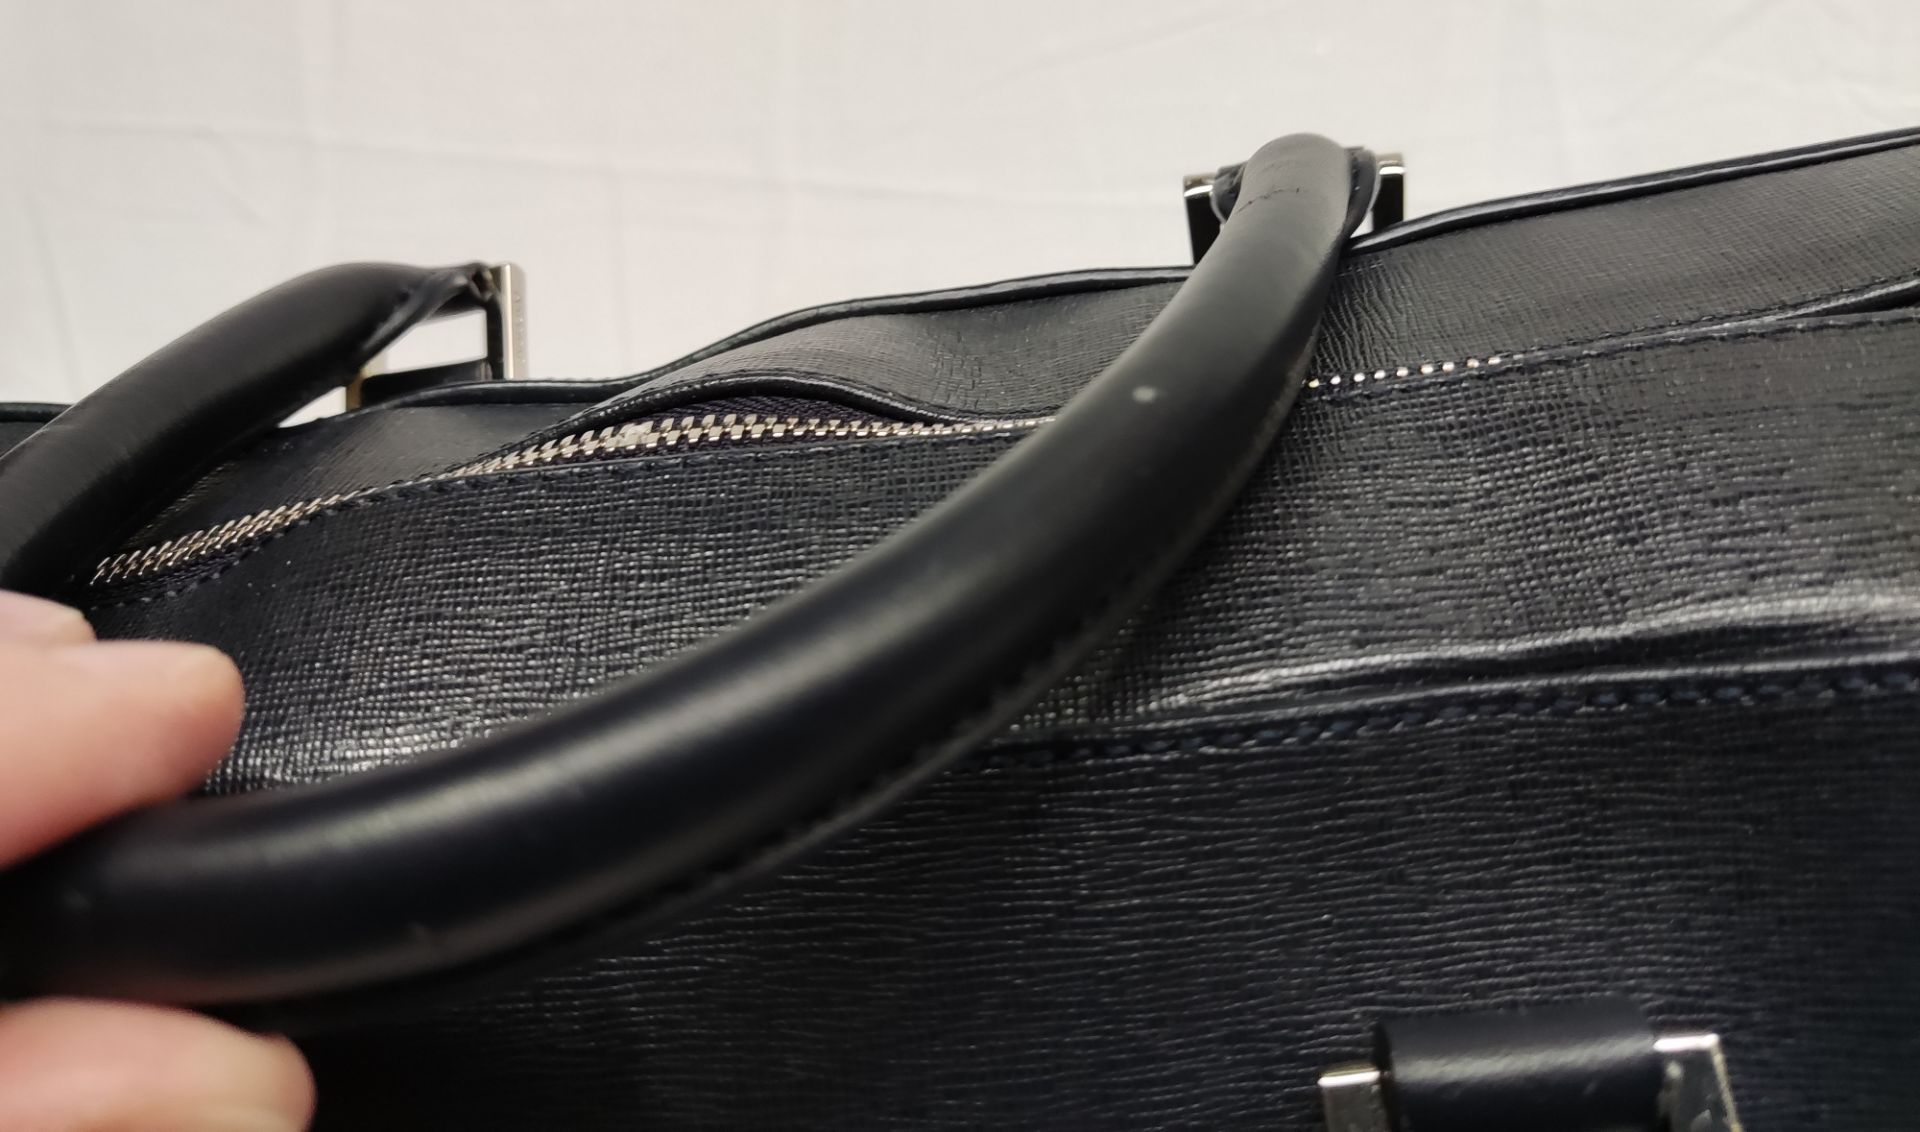 1 x ASPINAL OF LONDON Mount Street Small Laptop Bag In Black Saffiano - Original RRP £650.00 - Image 17 of 21